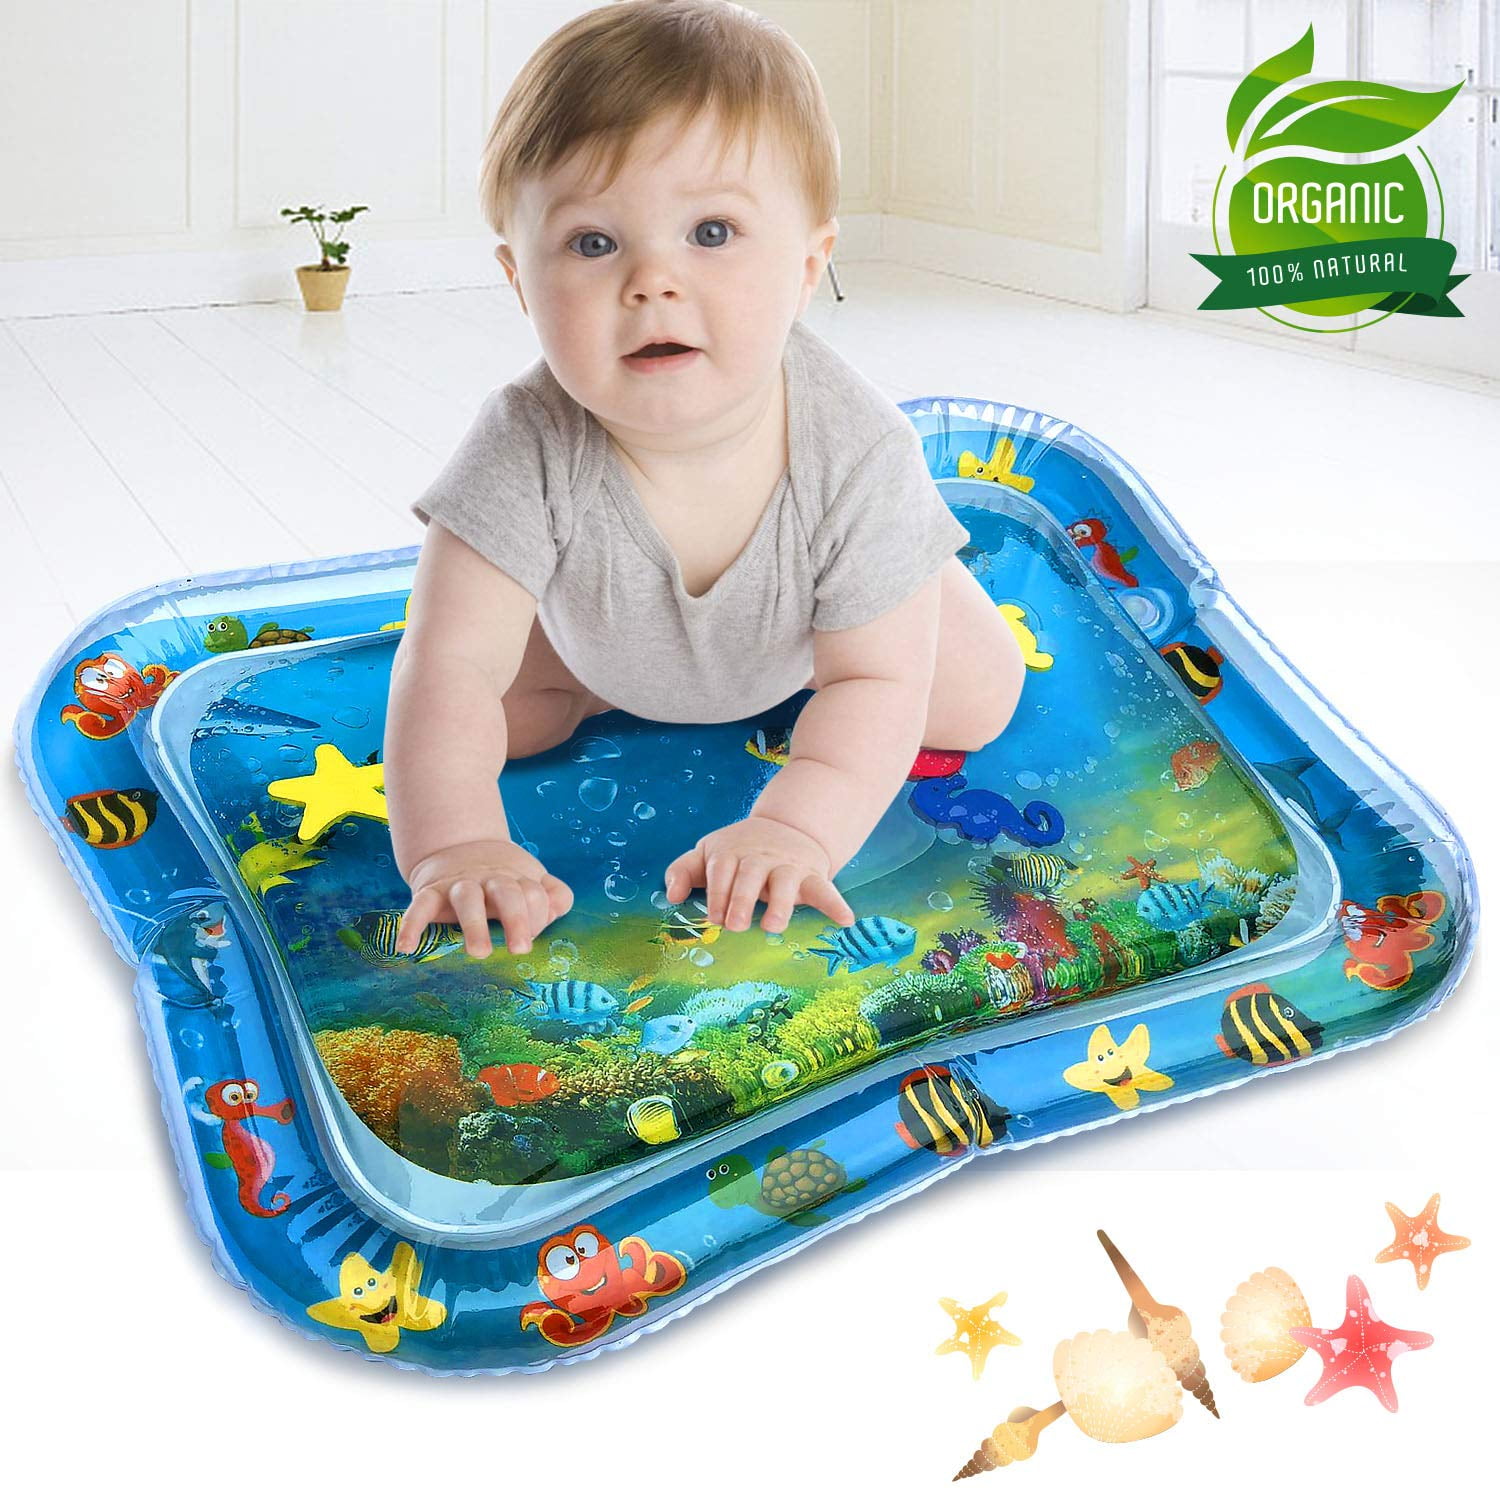 Sensory Toys Gifts for Baby Boy Girl Infinno Upgraded Material Inflatable Tummy Time Baby Water Mat for 3 6 9 12 Months Infants and Toddler Gyms Your Baby's Stimulation Growth 